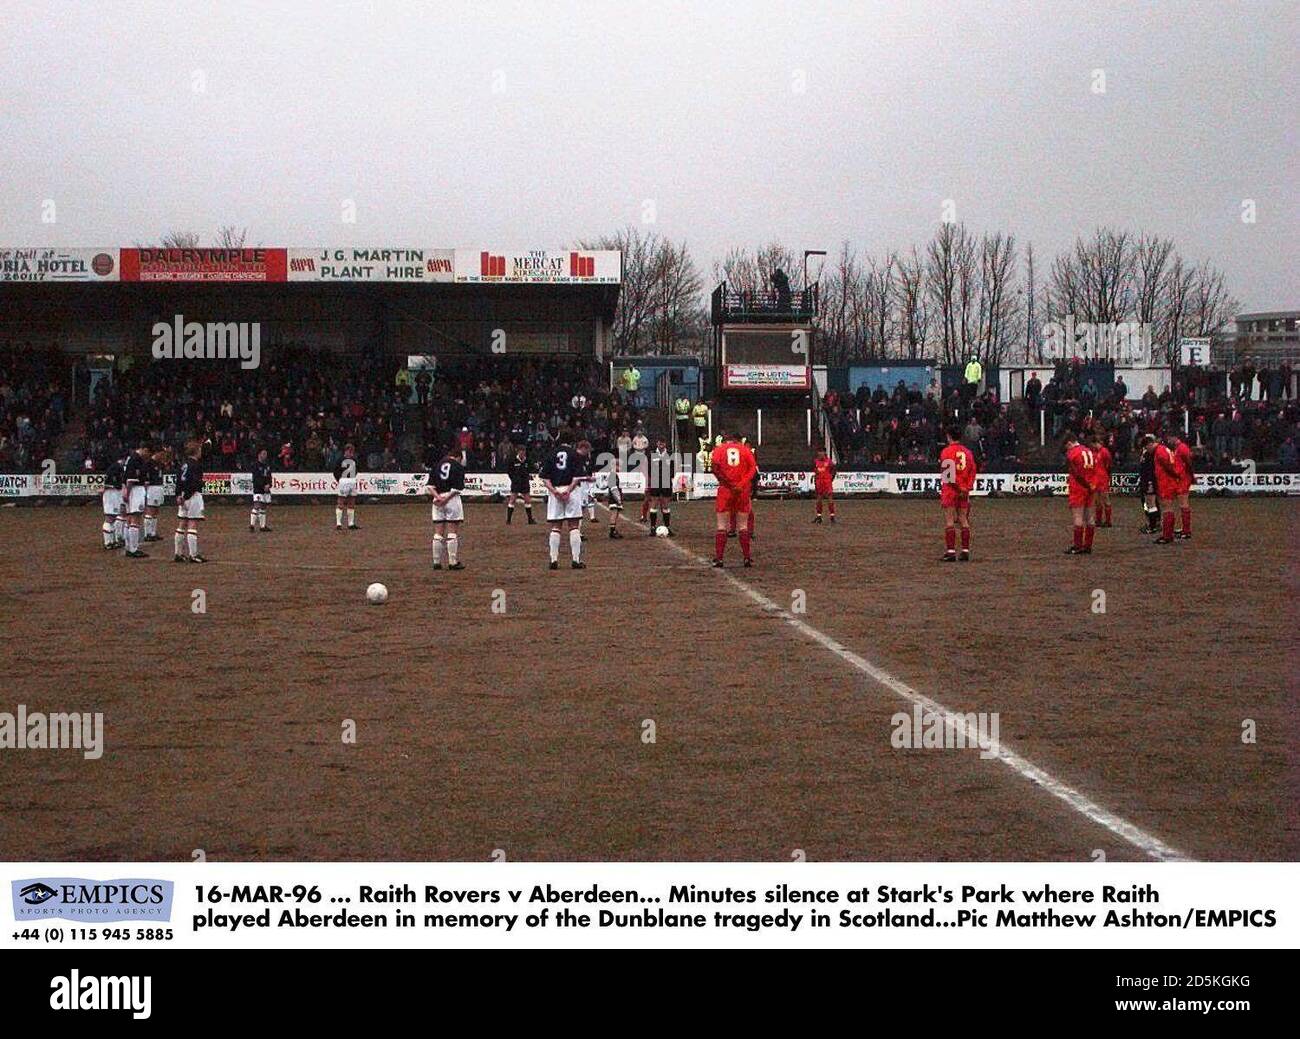 16-MAR-96 ... Raith Rovers v Aberdeen.  Minutes silence at Stark Park where Raith played Aberdeen, in memory of the Dunblane tragedy in Scotland Stock Photo